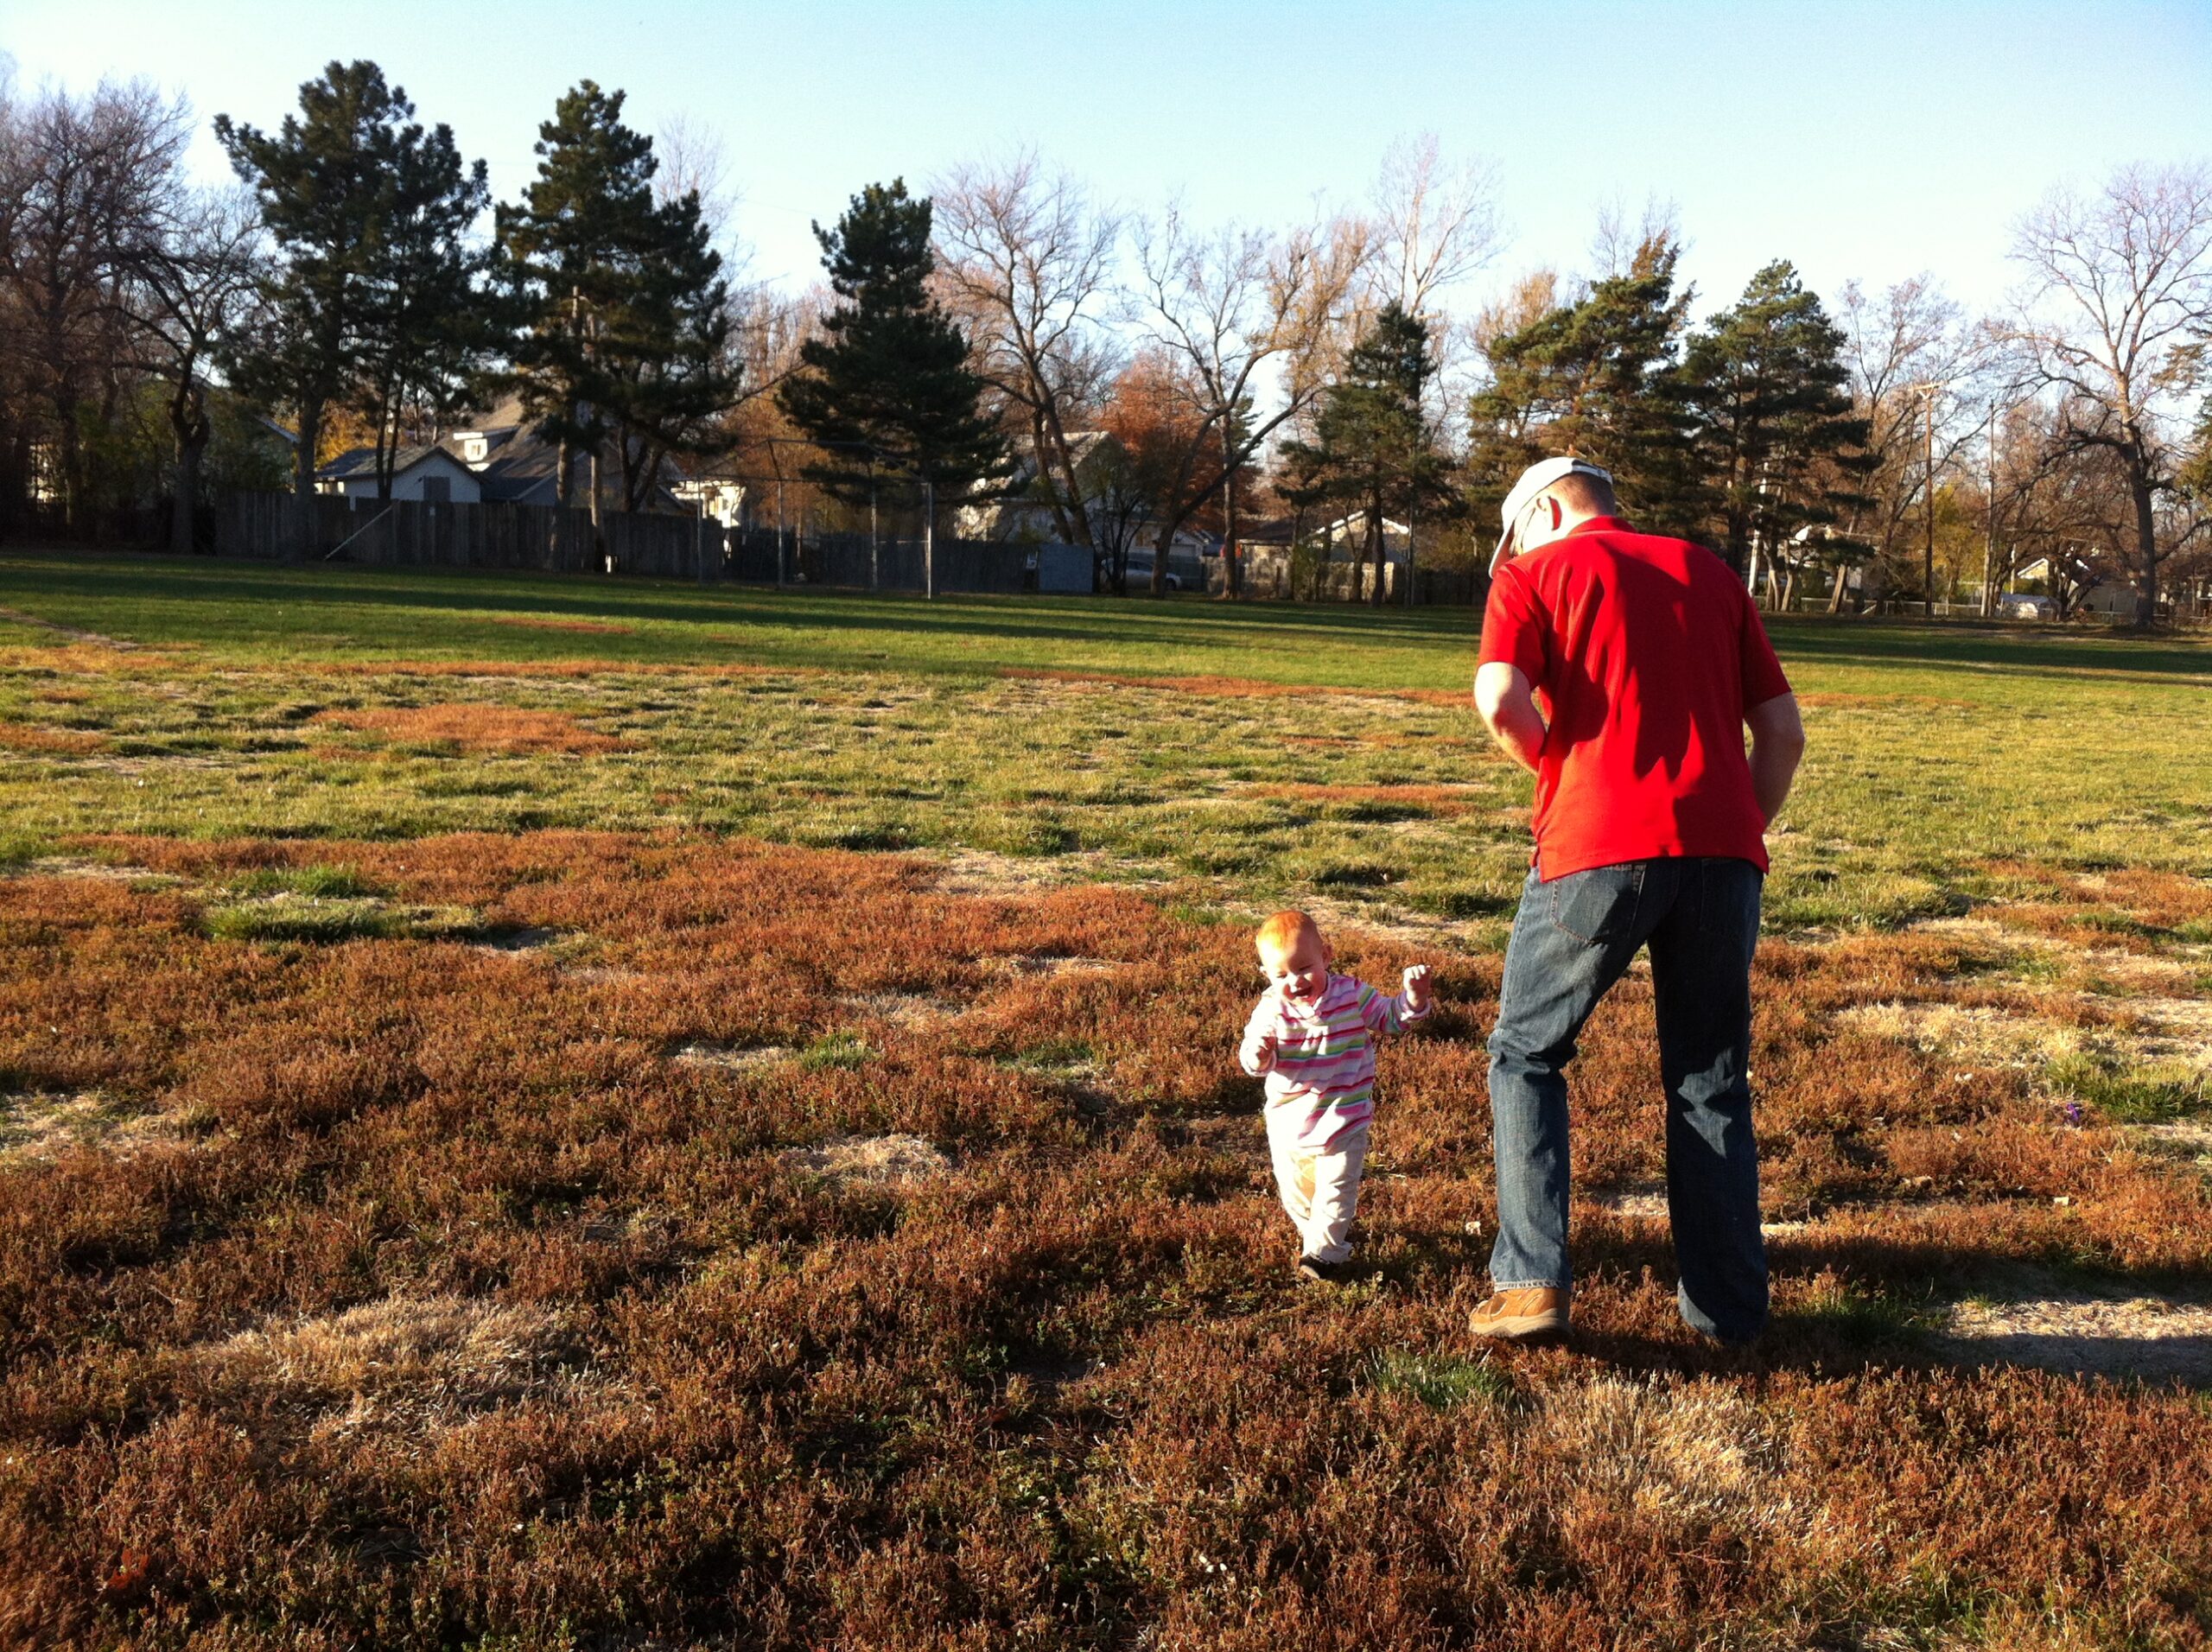 A small girl joyfully runs in a large park with her father.